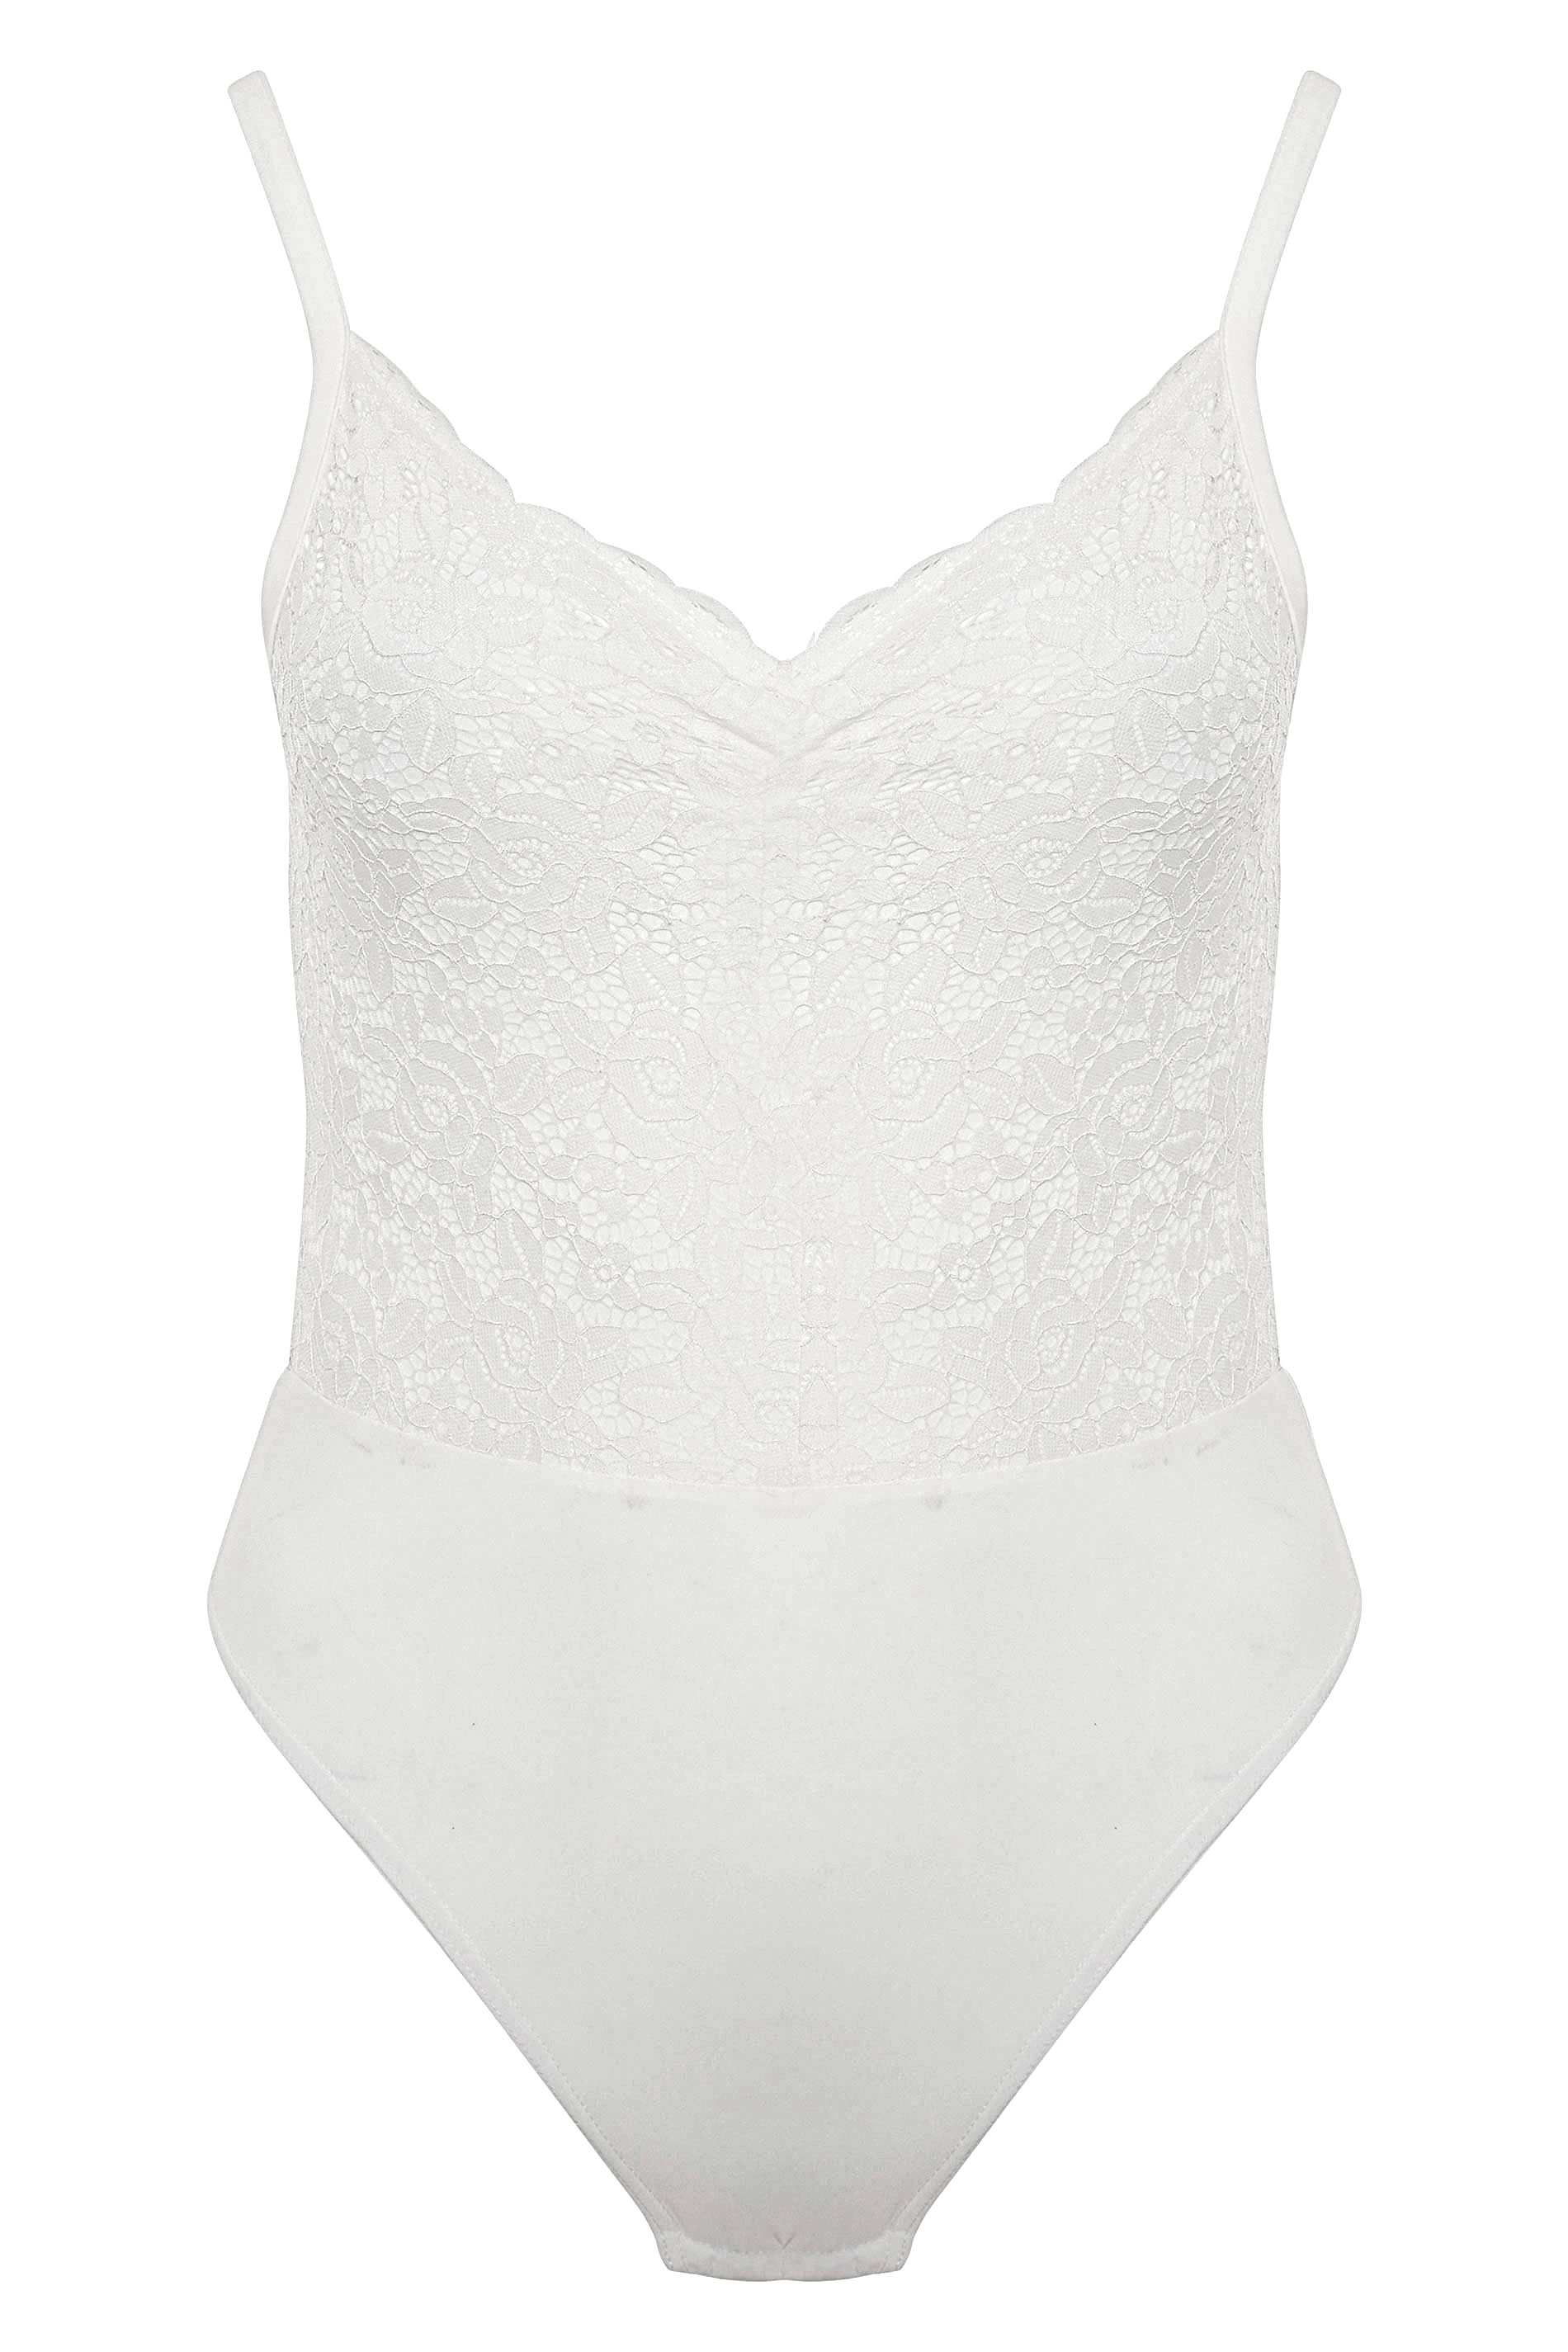 Plus Size LIMITED COLLECTION White Lace Bodysuit | Yours Clothing